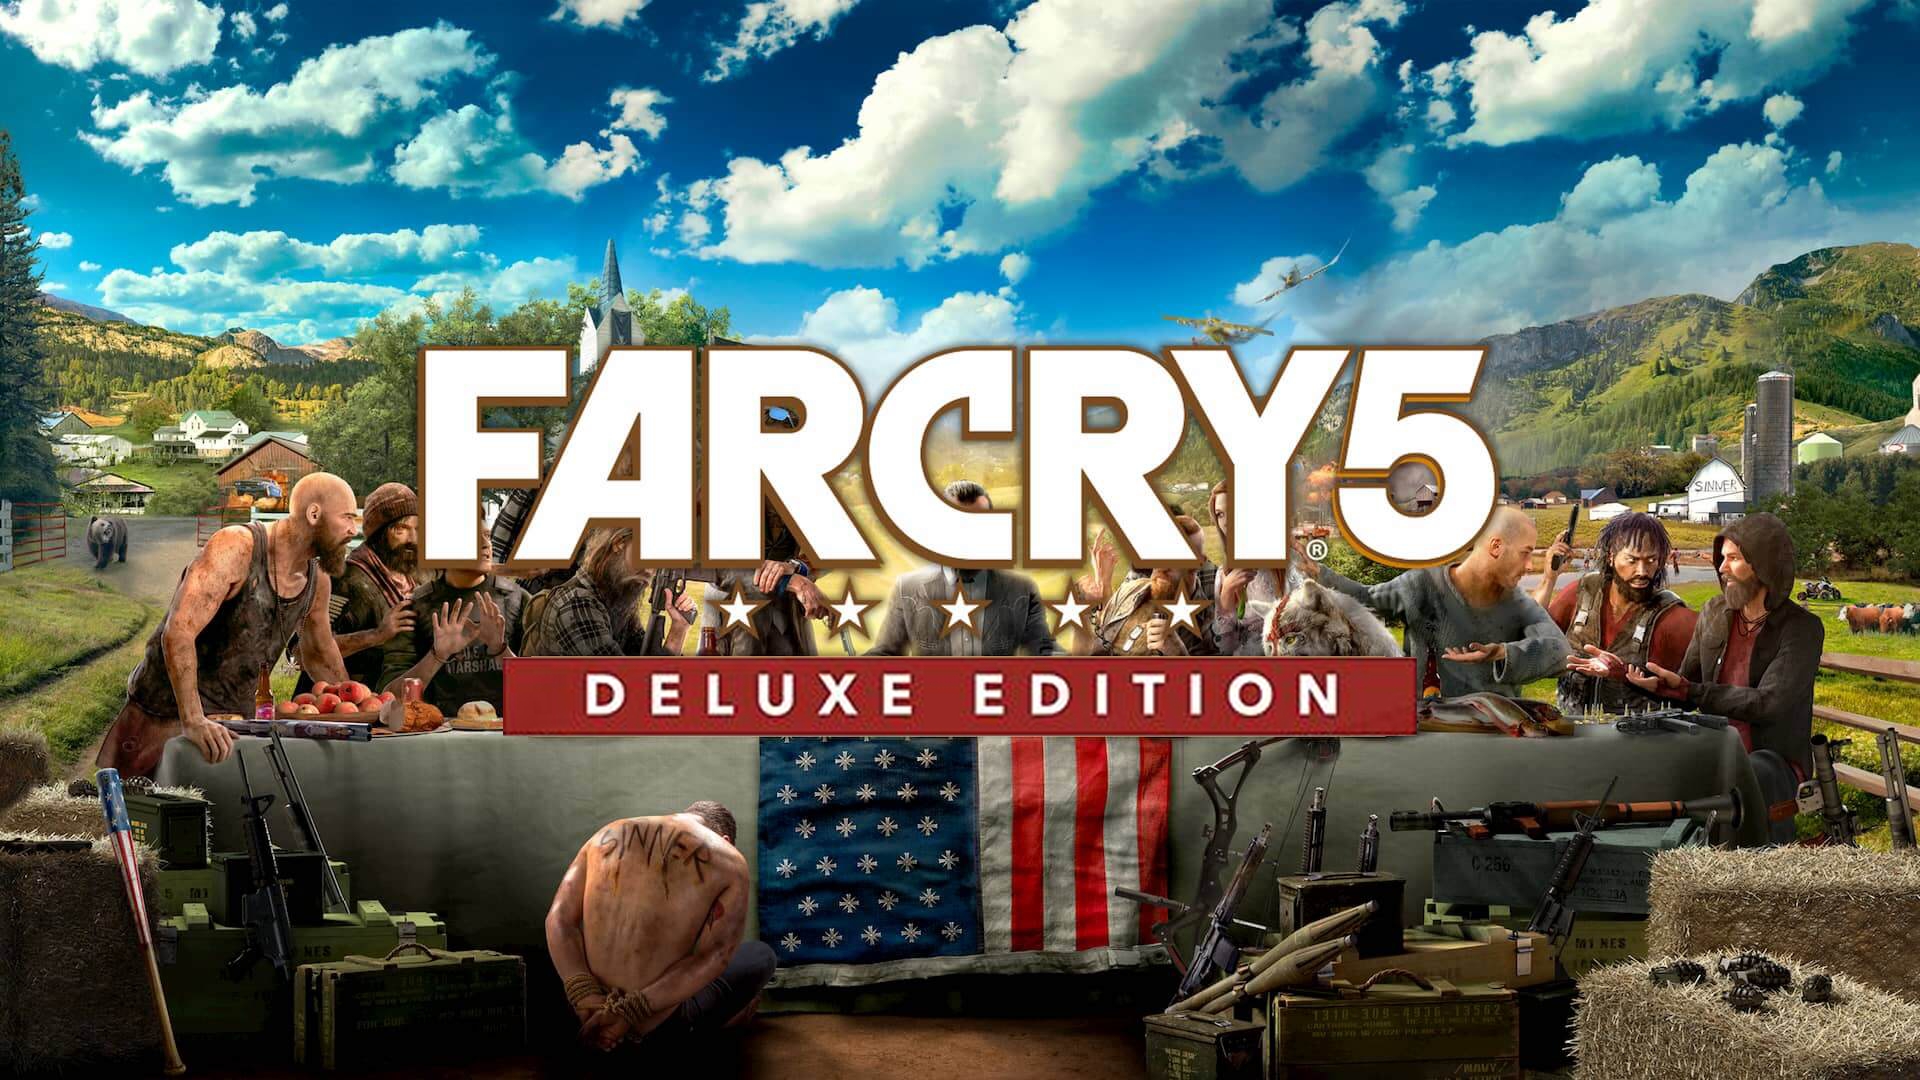 Buy Cry 5 Deluxe Edition Ubisoft Connect